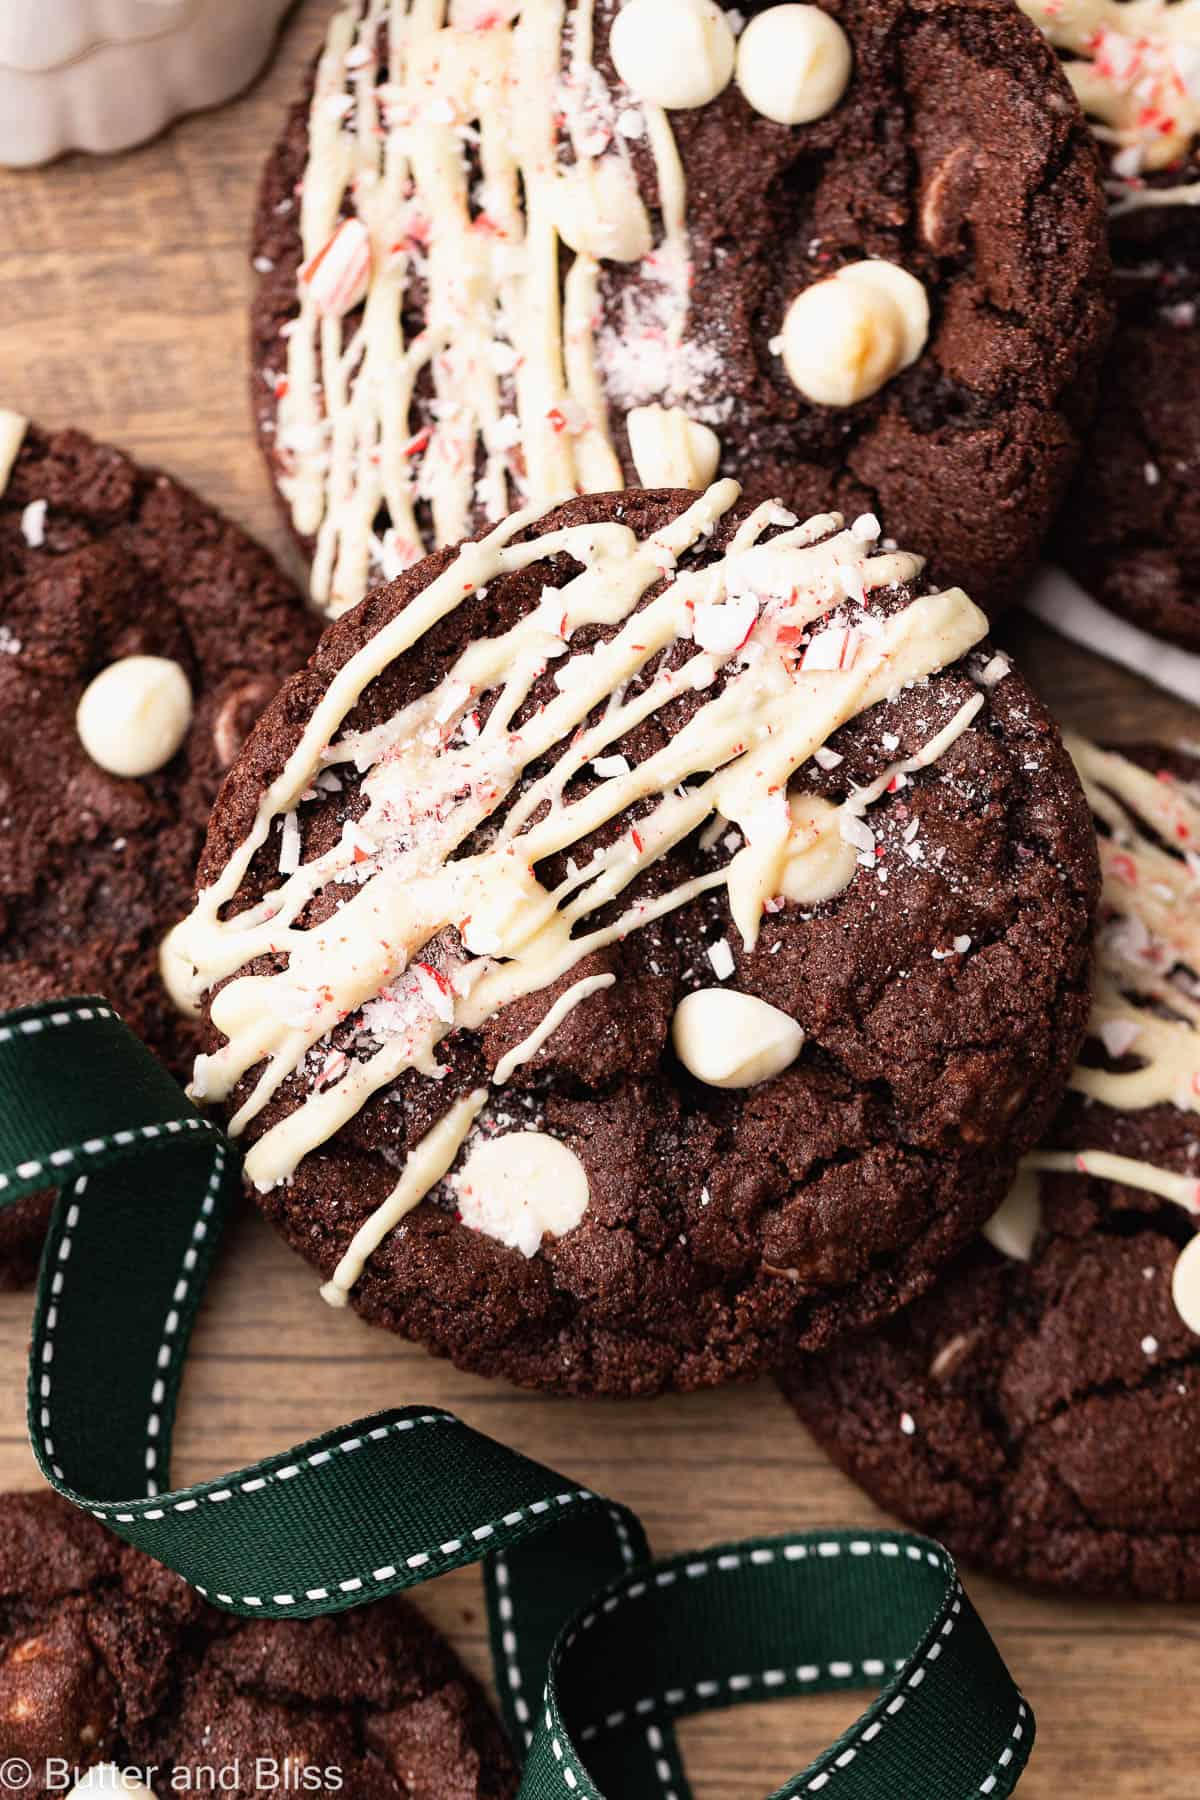 Gluten free chocolate peppermint cookies with white chocolate drizzle arranged on a wood table.